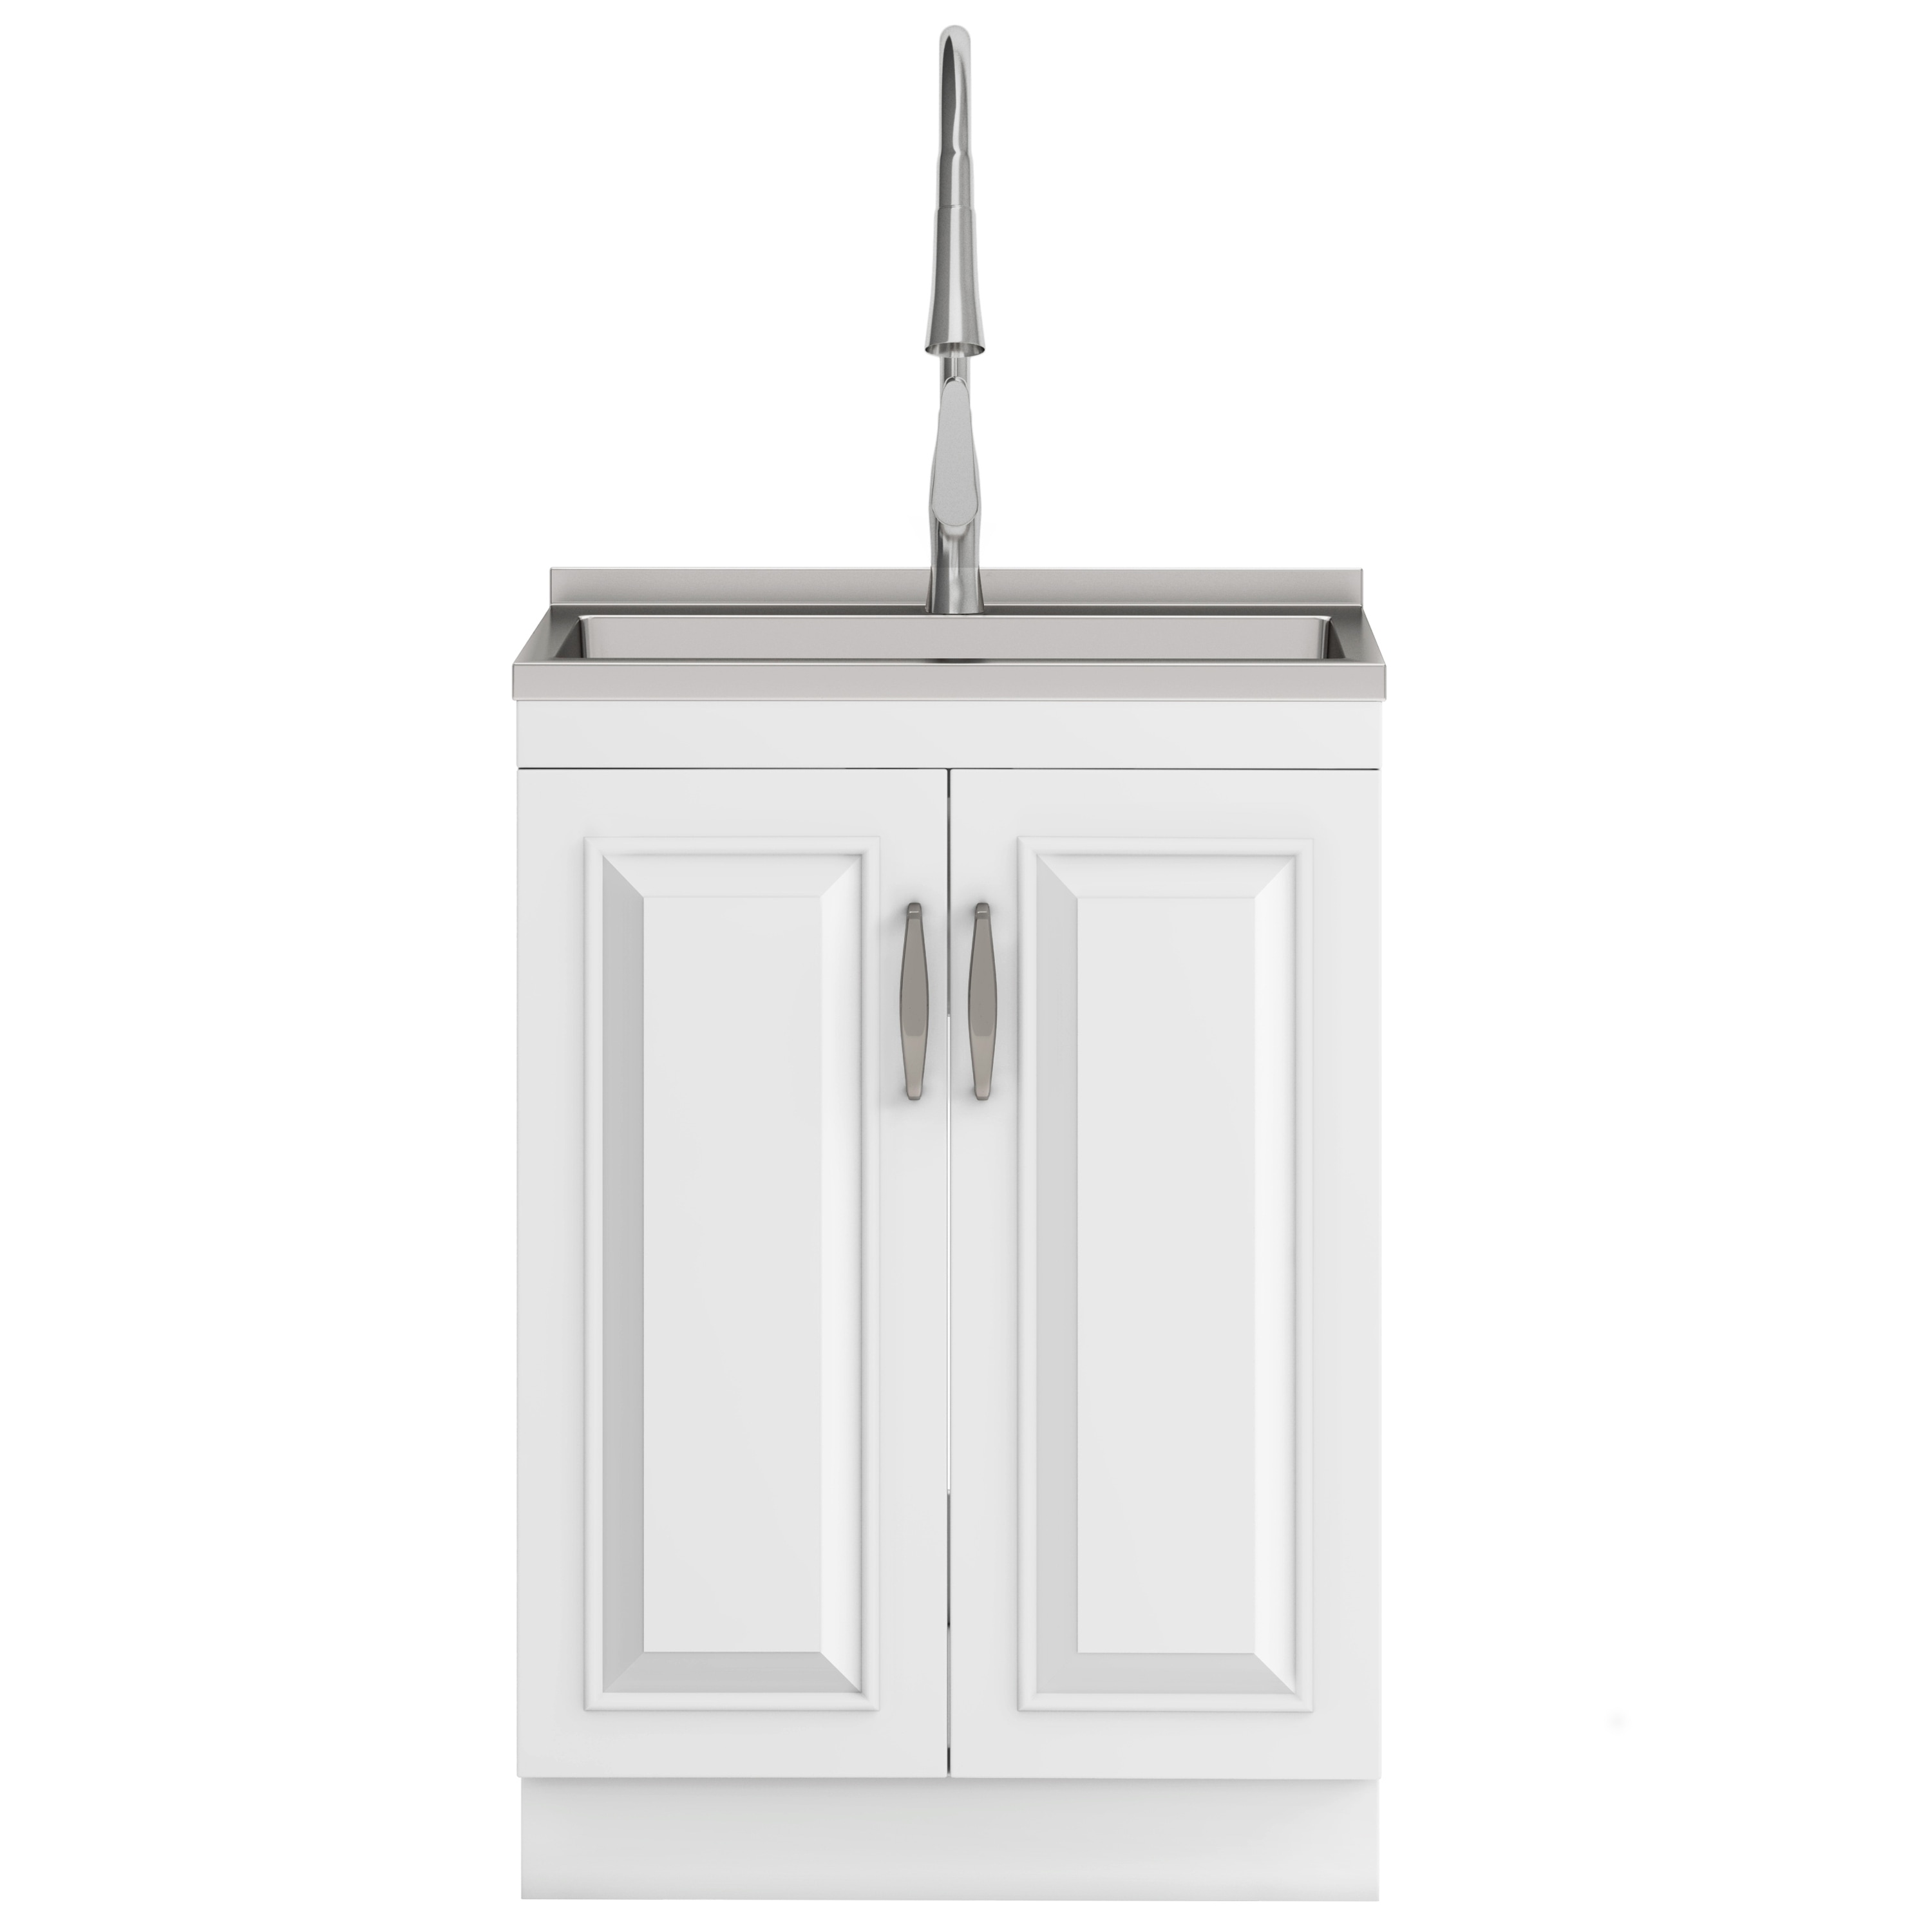 https://ak1.ostkcdn.com/images/products/is/images/direct/c8931151060883a400e16a4898a9fe5b3ed73ae2/WYNDENHALL-Gregg-Deluxe-Laundry-Cabinet-with-Pull-out-Faucet-and-Stainless-Steel-Sink.jpg